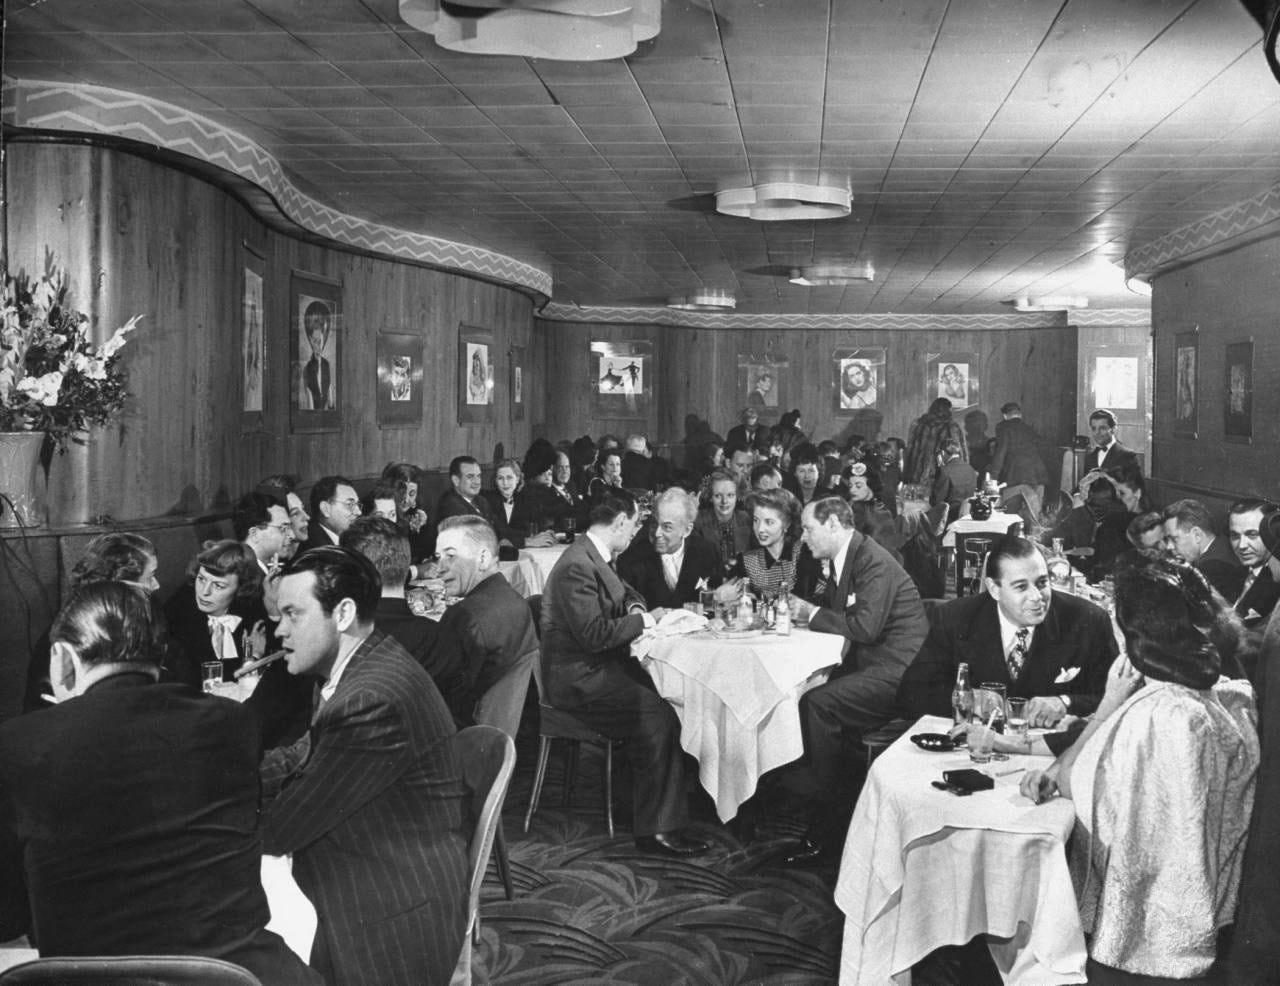 Inside the famous Cub Room of the Stork Club where we can spot Orson Welles, Margaret Sullavan or Sherman Billingsley.